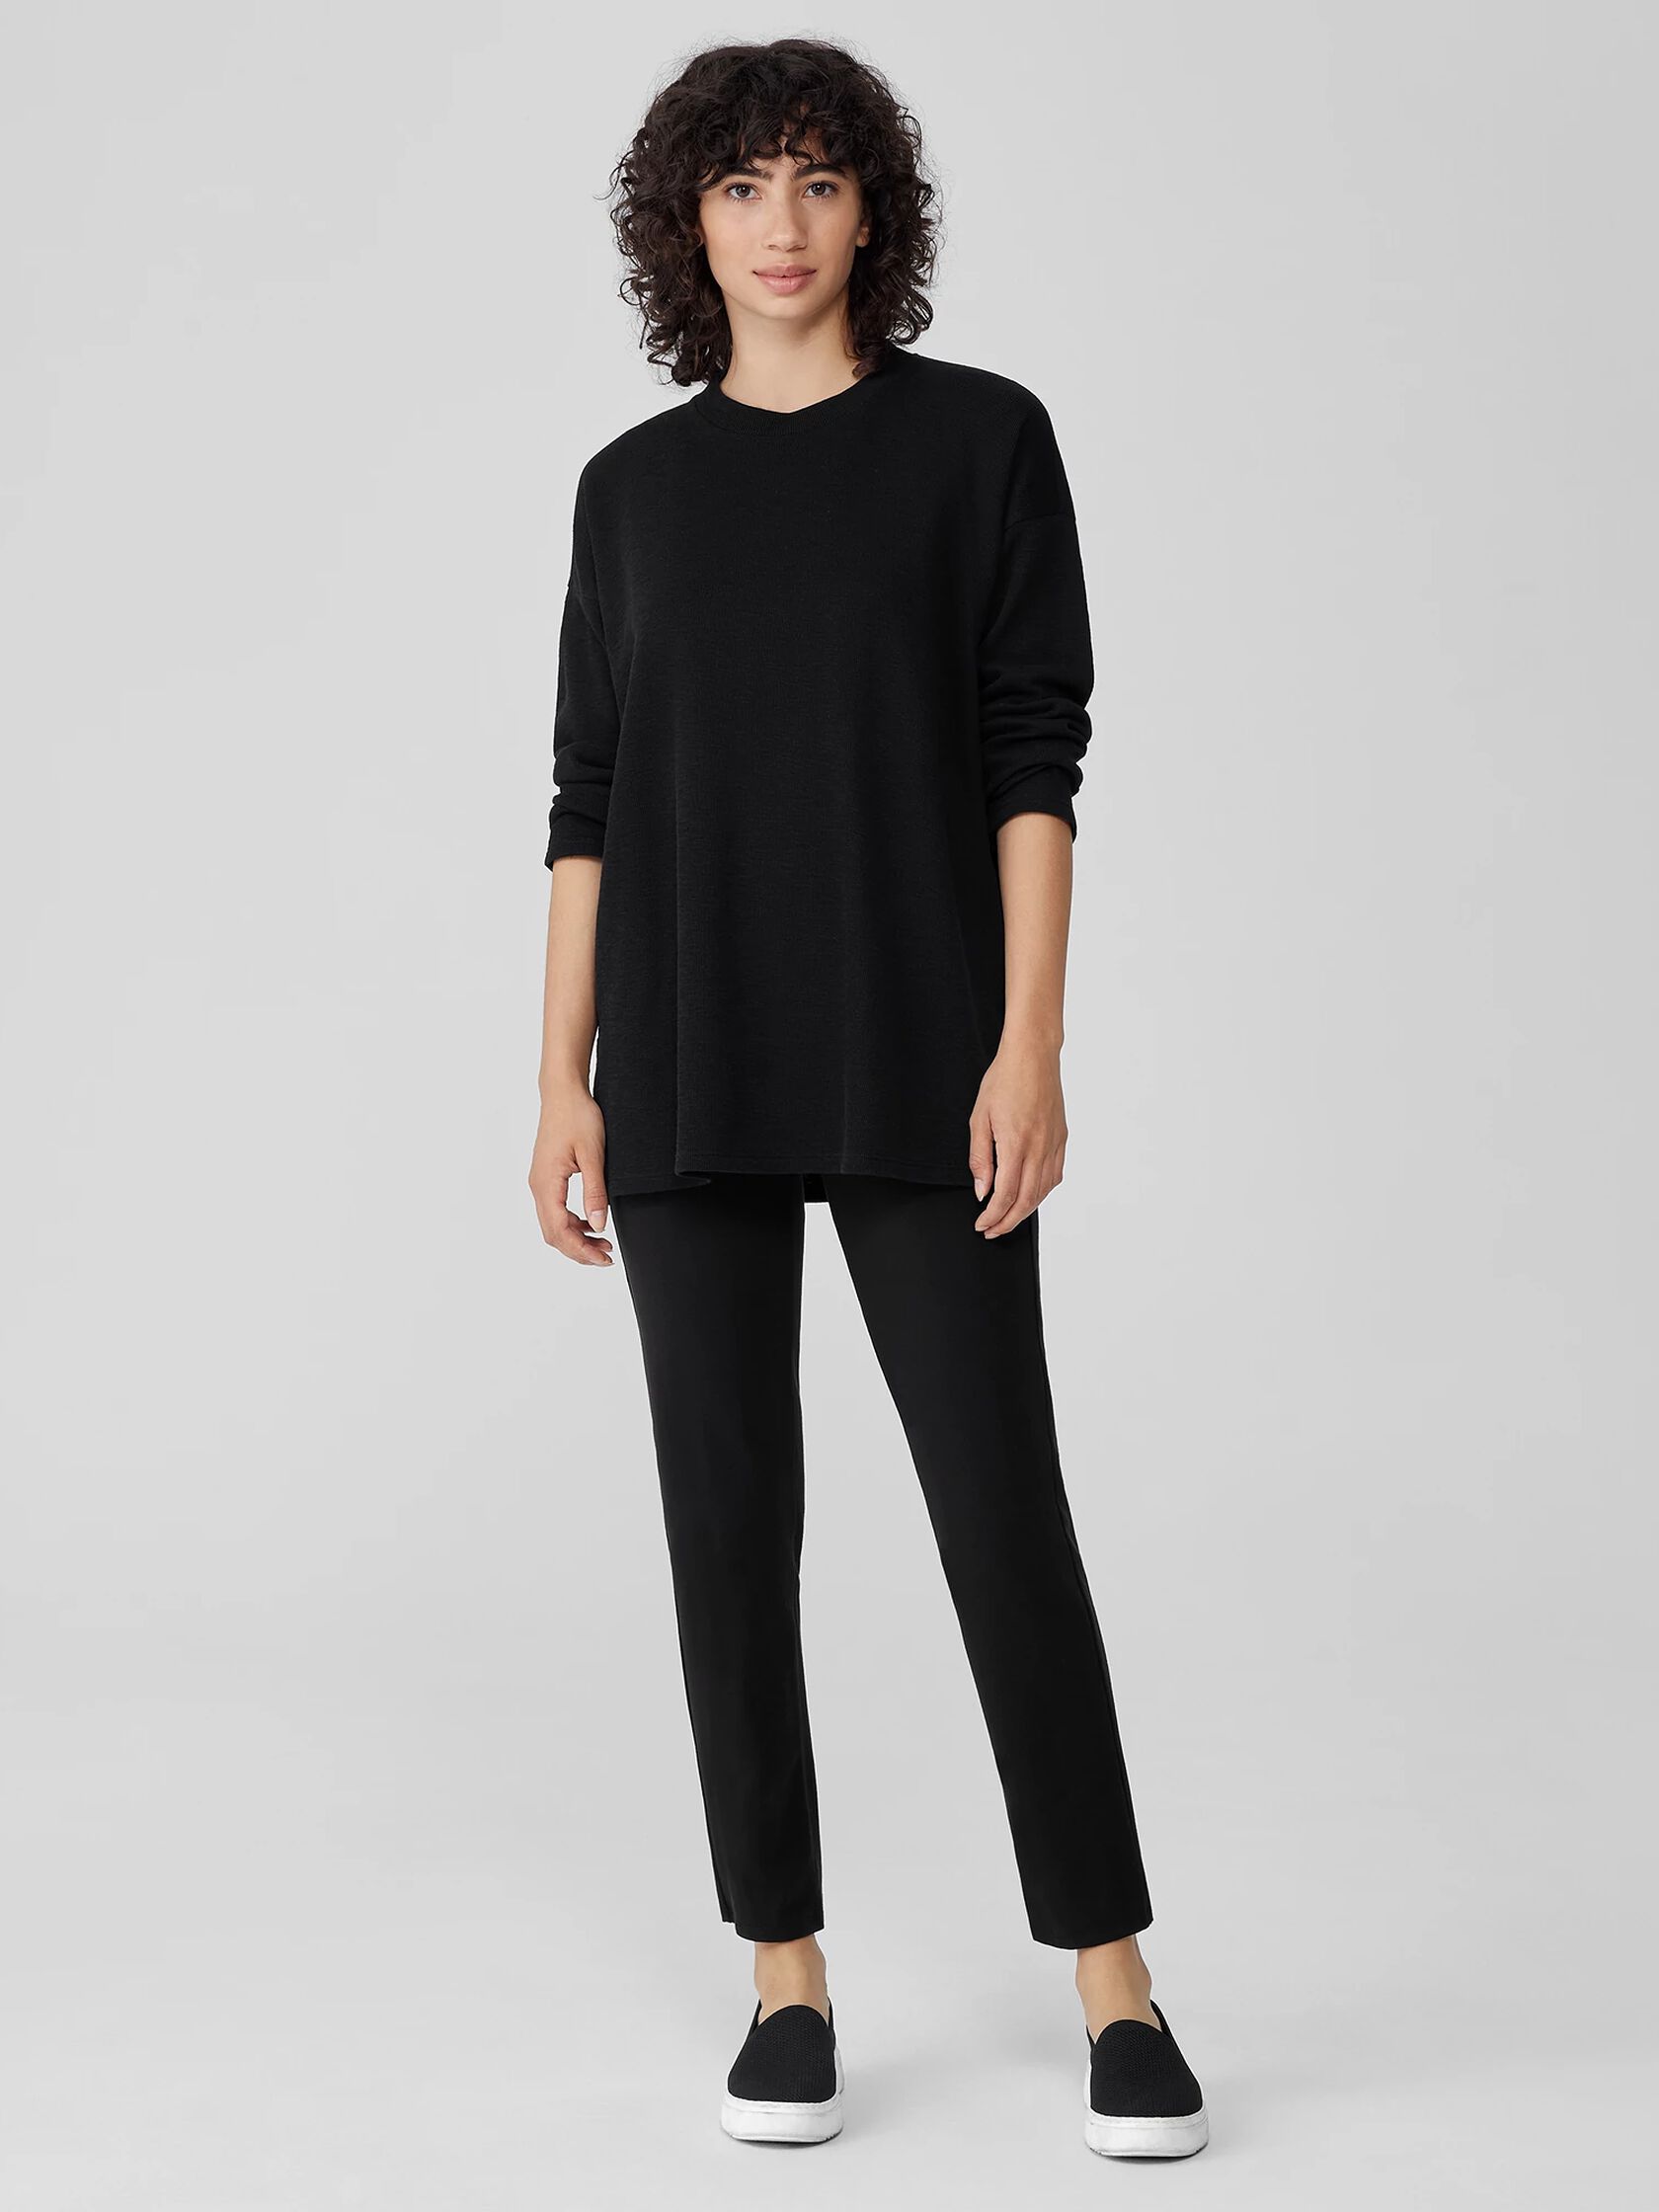 Pima Cotton | FISHER Pant Jersey Stretch High-Waisted EILEEN